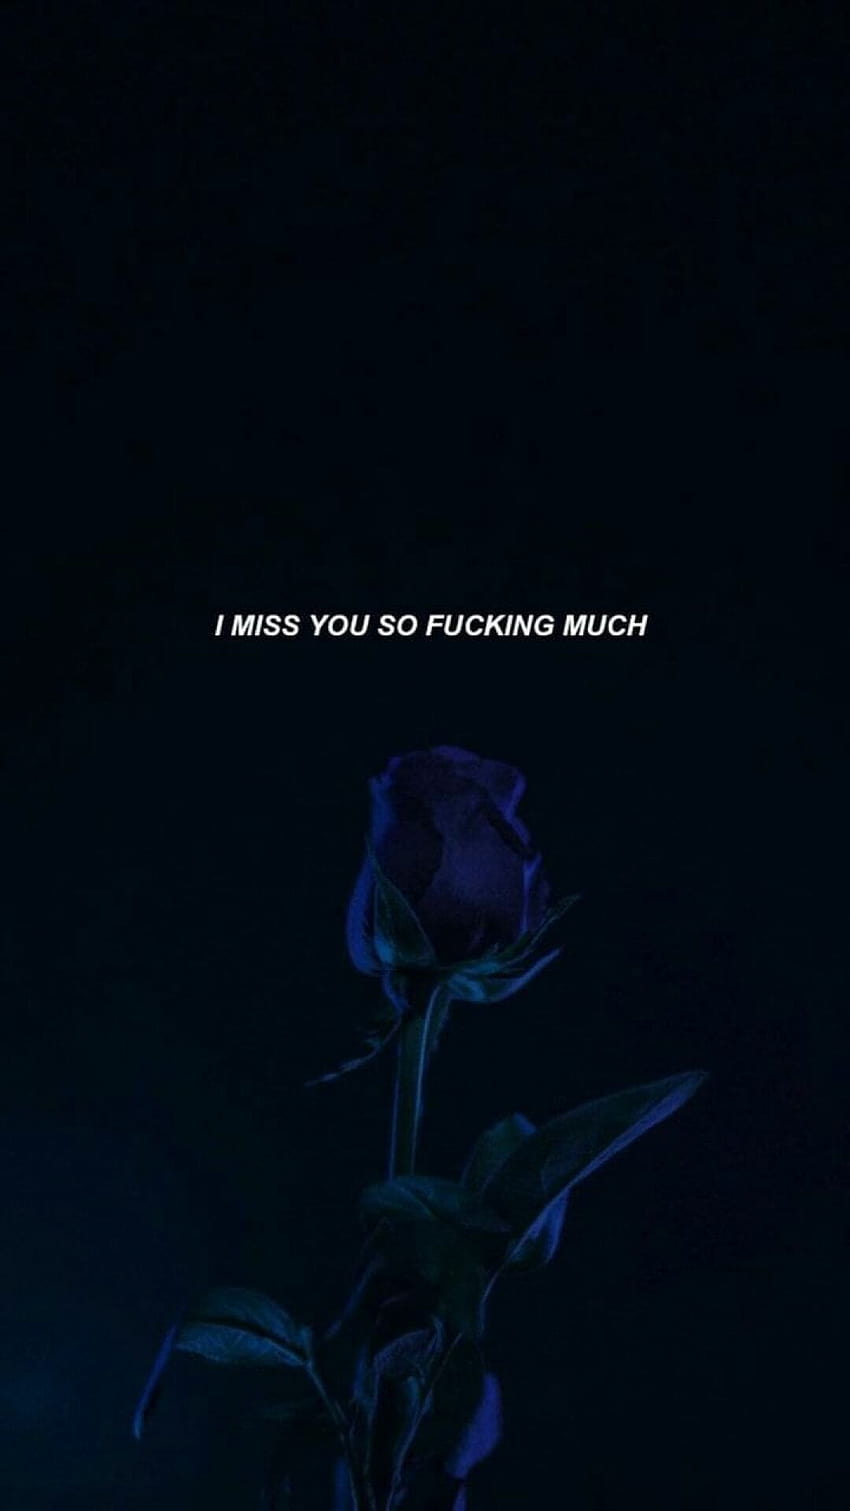 Black background, rose in the middle, i miss you so fucking much, written in white - Dark blue, navy blue